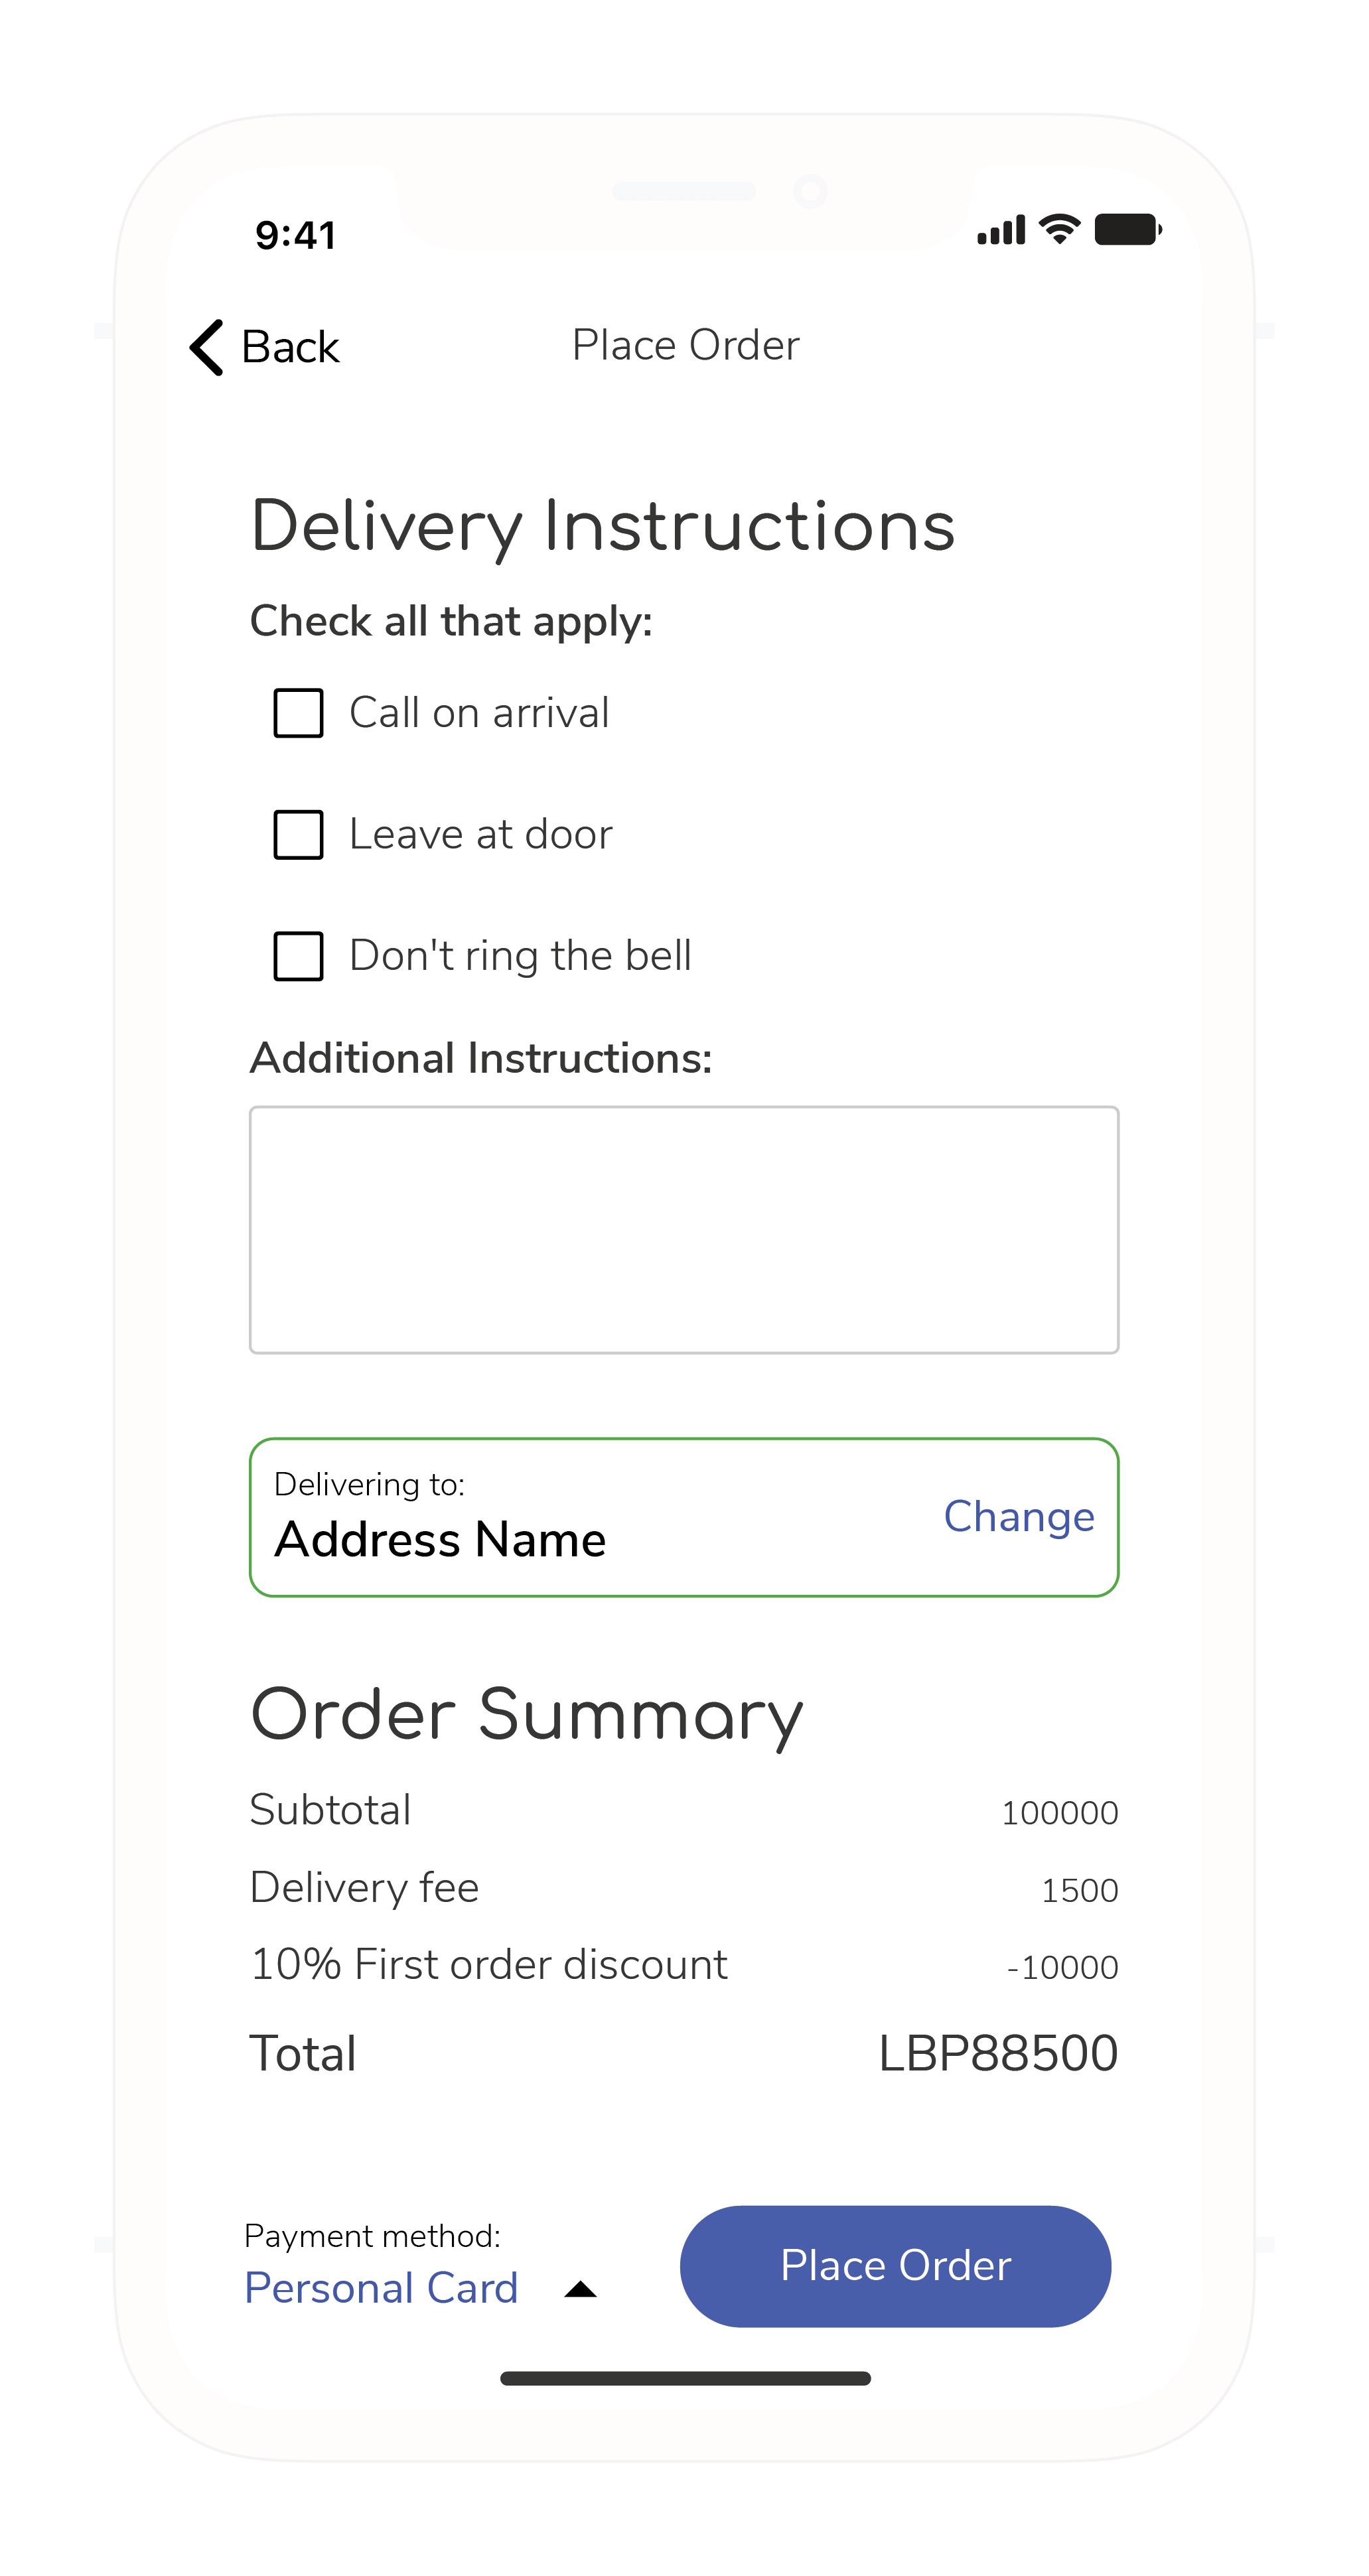 Screenshot of the Place Order screen. This page allows users to give special delivery instructions, change payment methods, and confirm their order